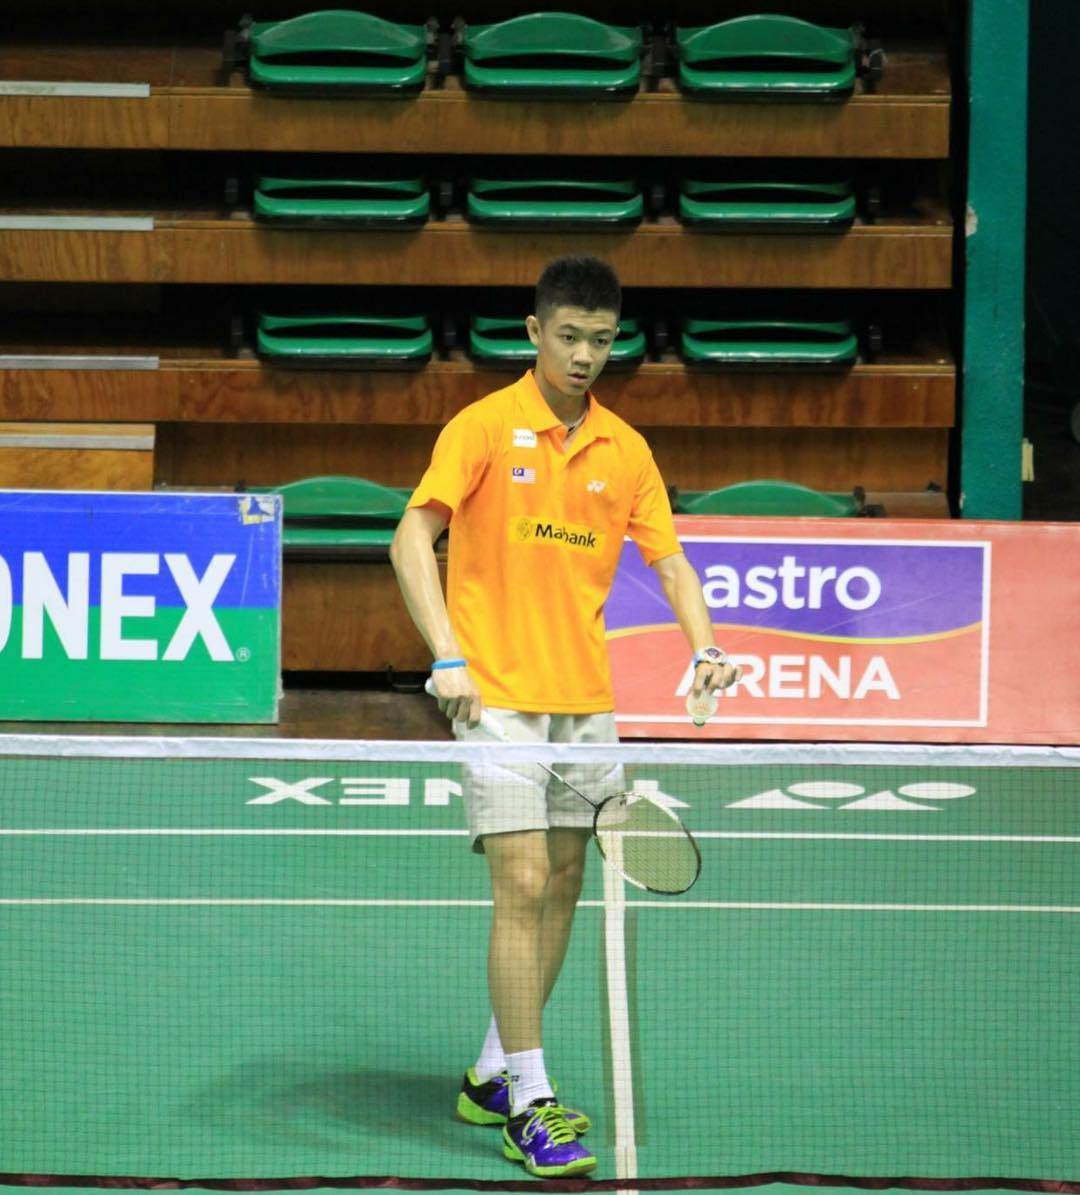 Facts About Lee Zii Jia, Malaysian badminton player - 18 years old